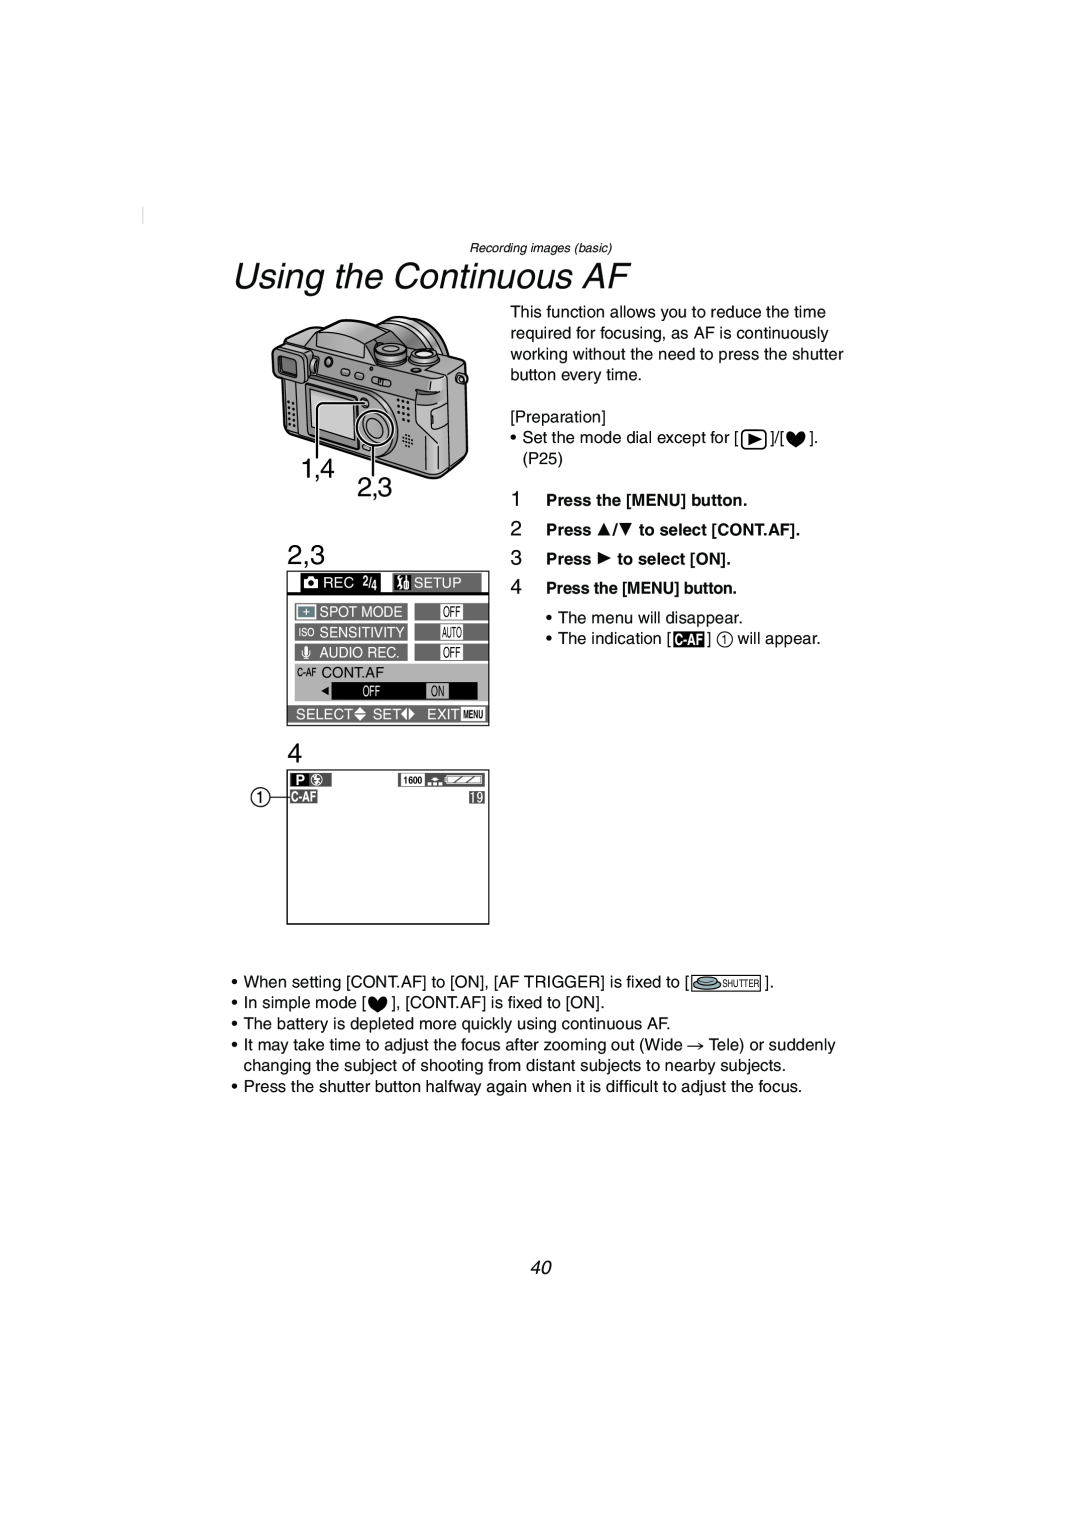 Panasonic DMC-FZ2PP operating instructions Using the Continuous AF, Press the MENU button 2 Press 3/4 to select CONT.AF 